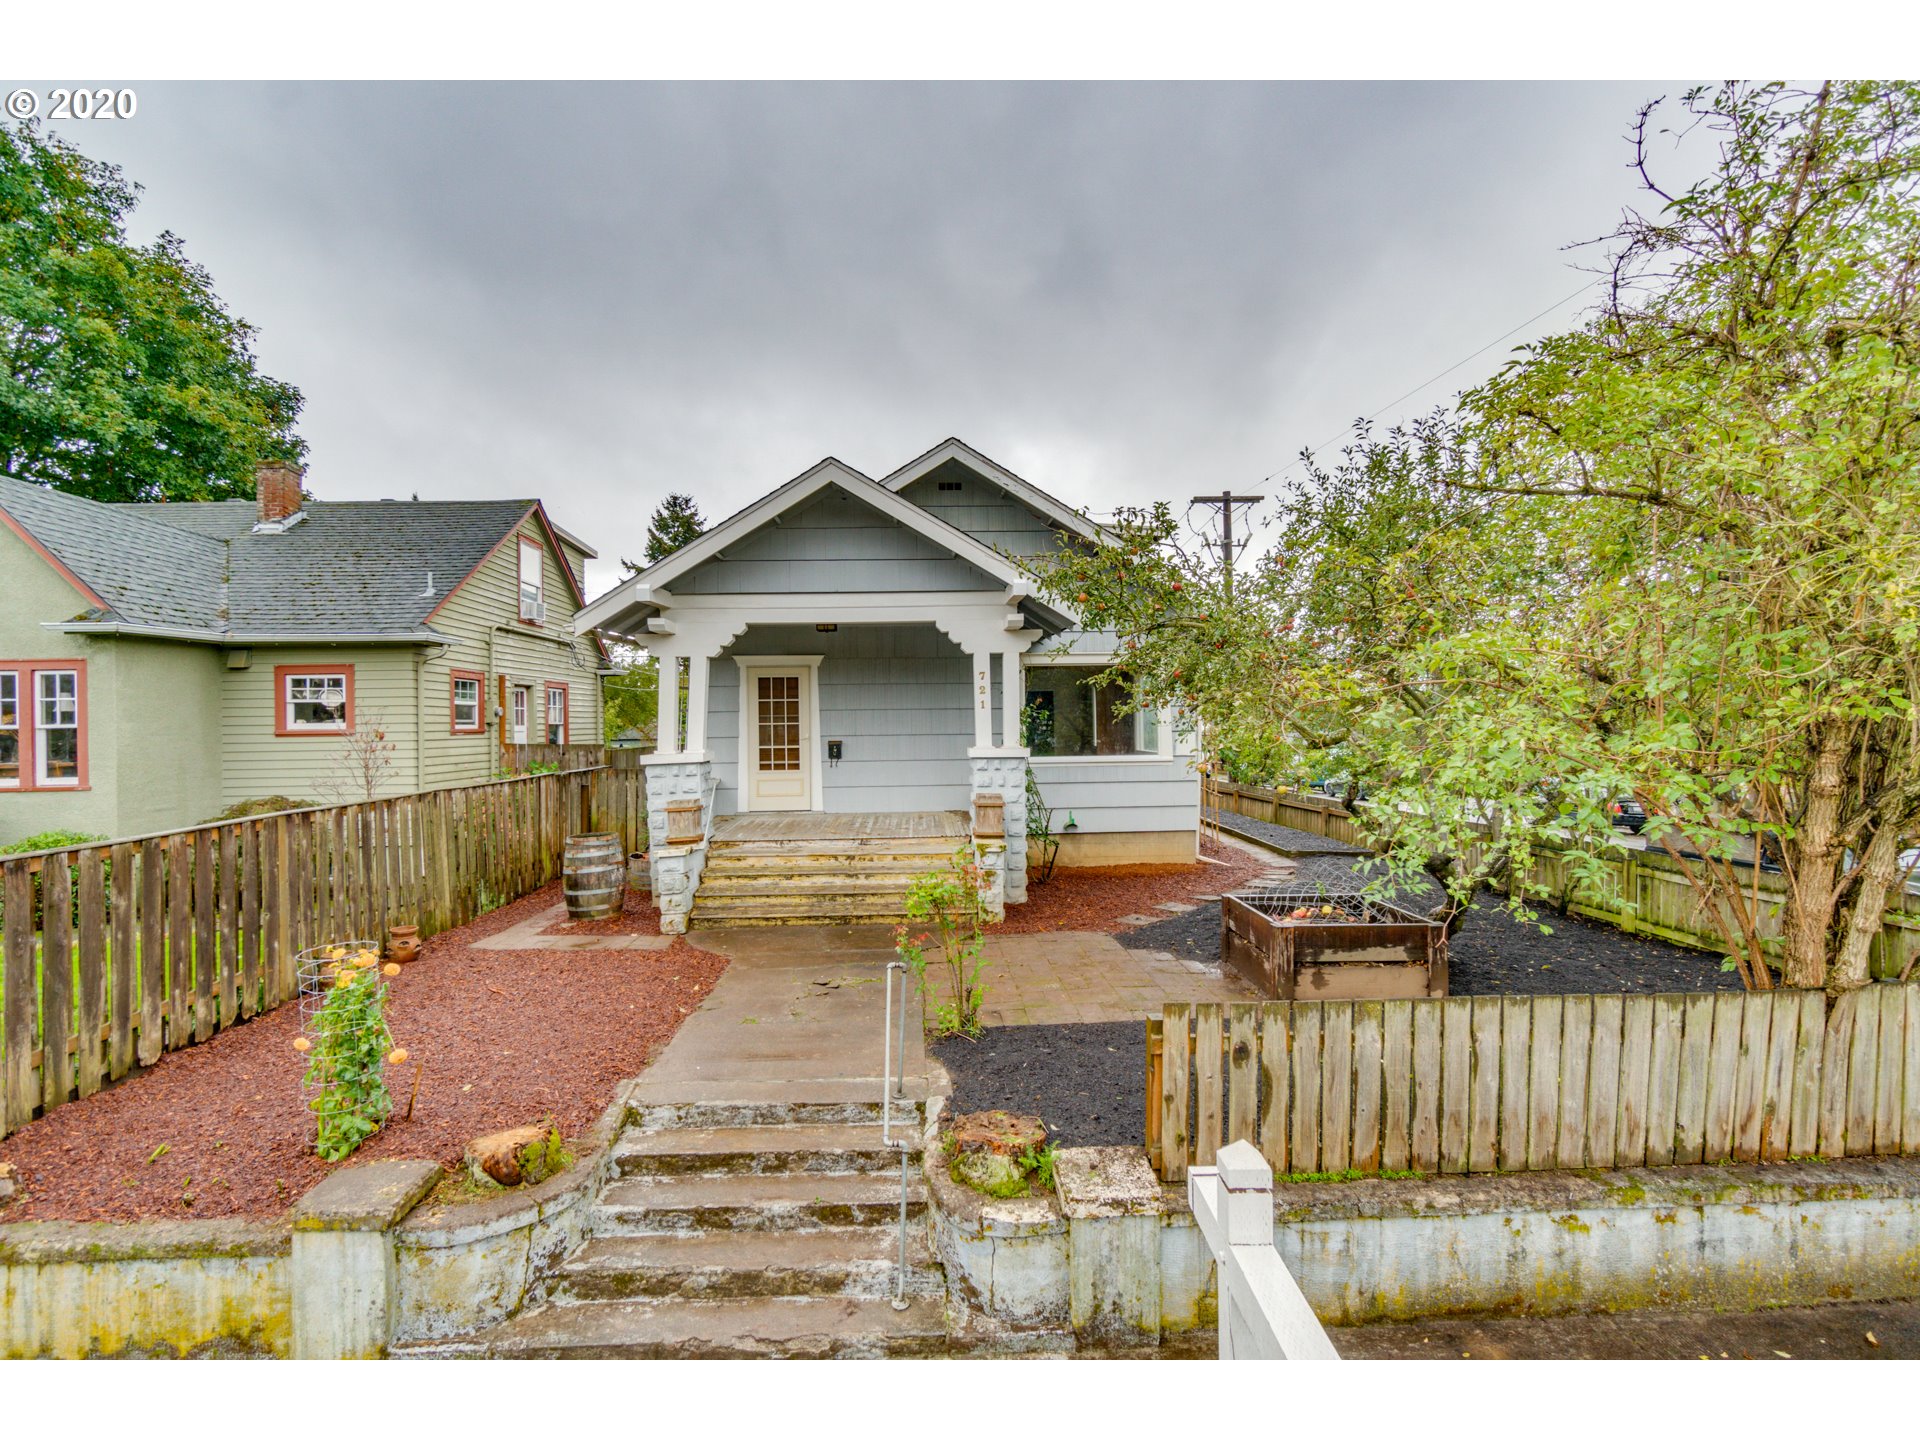 721 W 29TH ST (1 of 32)